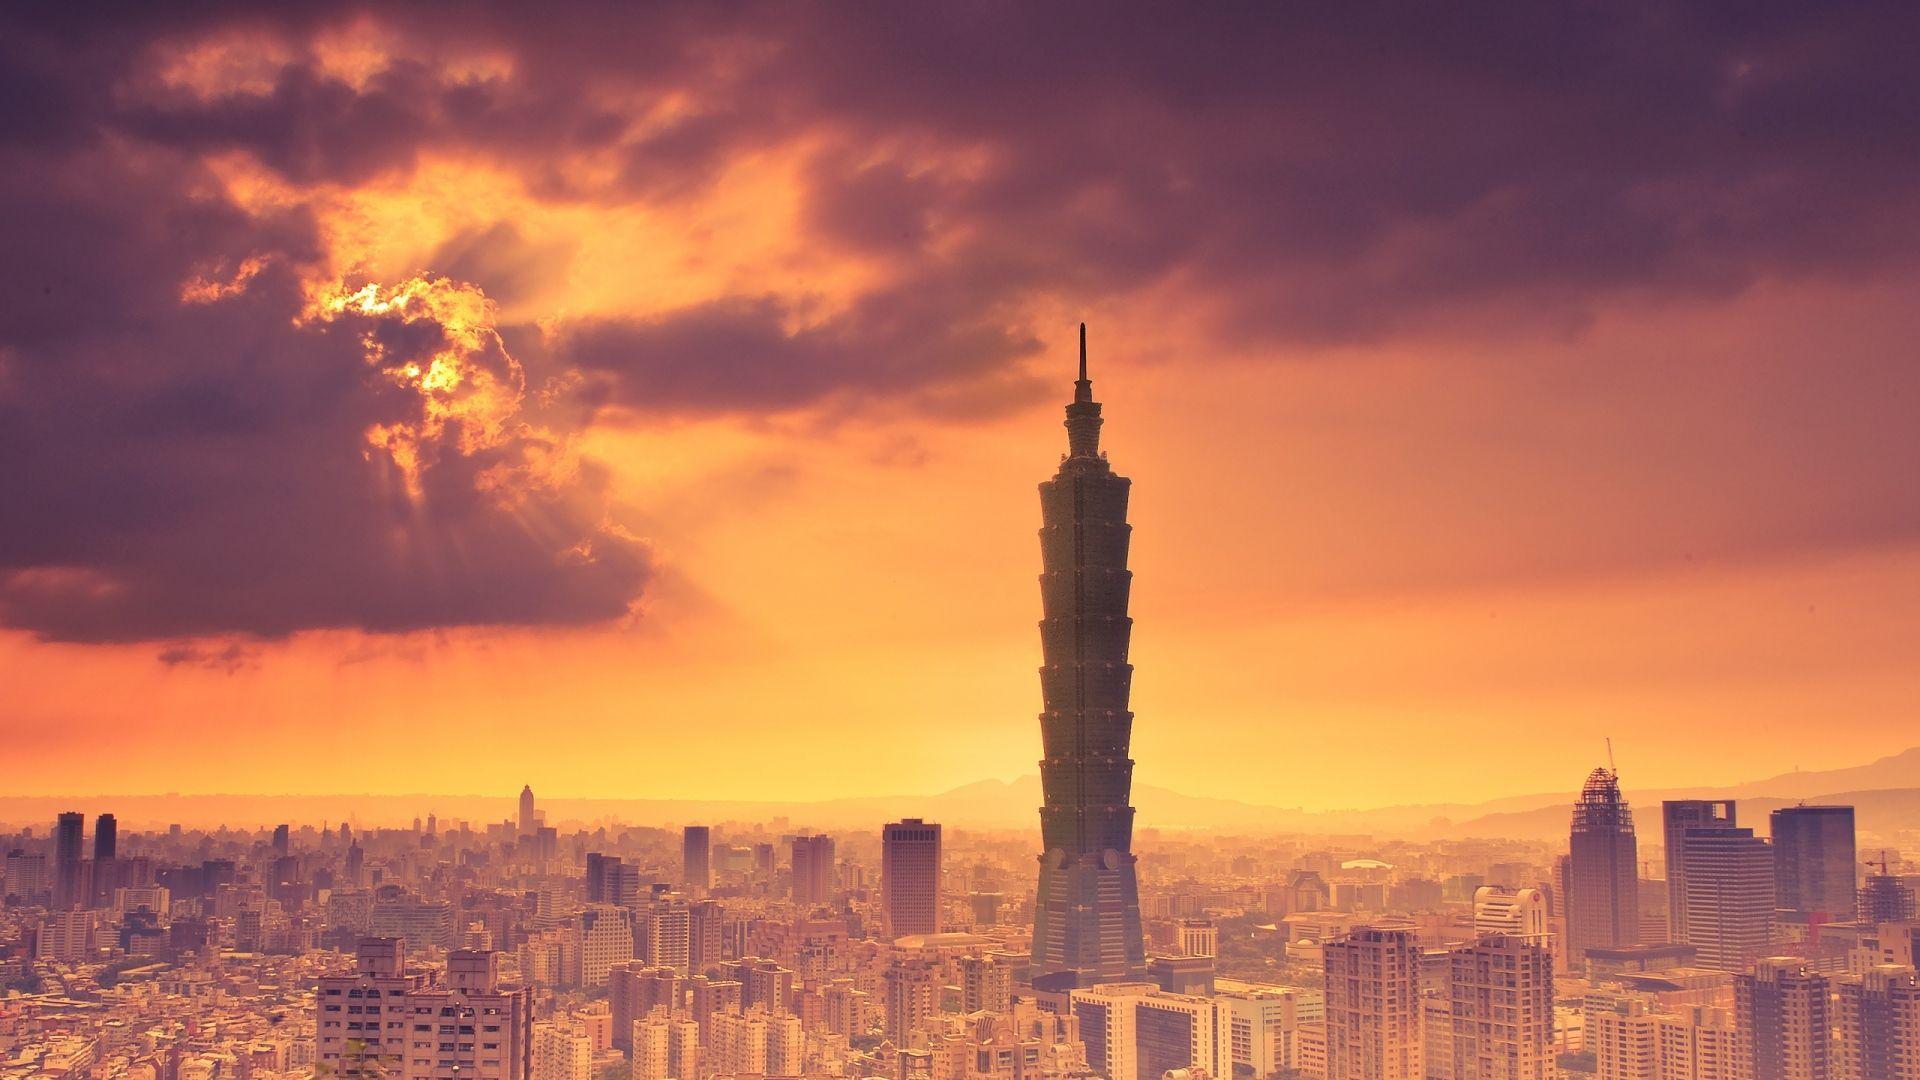 Taiwan Photos Download The BEST Free Taiwan Stock Photos  HD Images